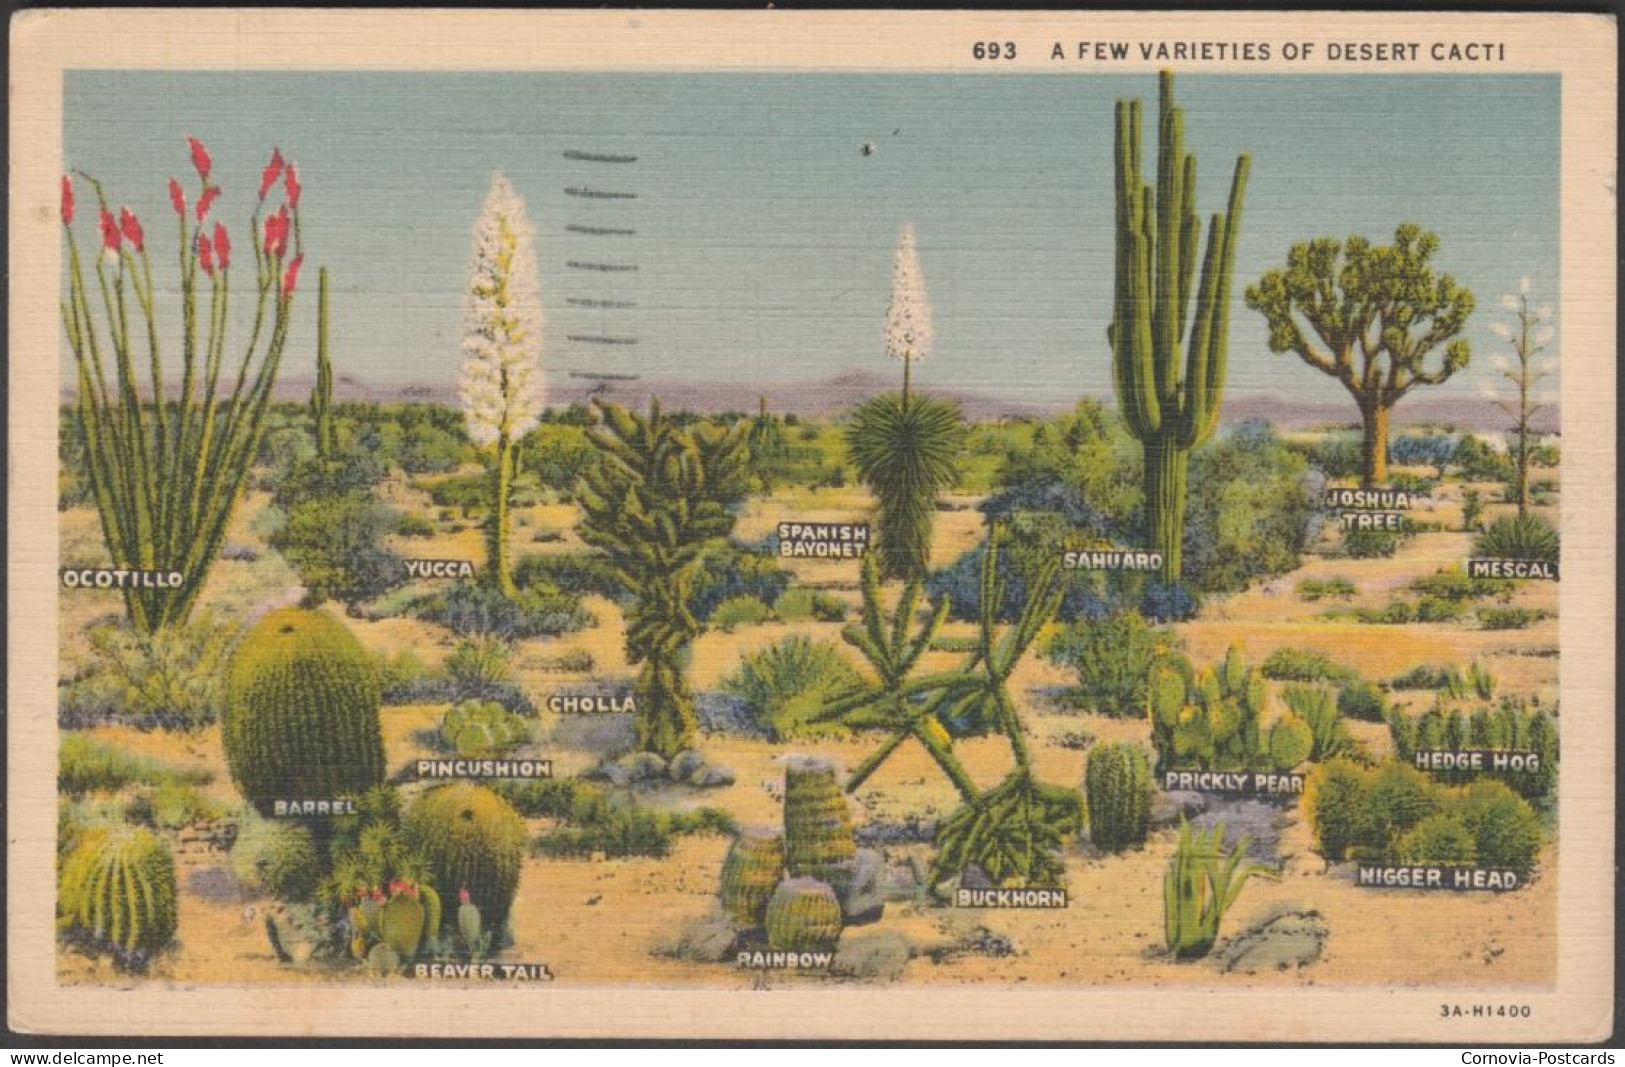 A Few Varieties Of Desert Cacti, 1939 - Western Publishing & Novelty Co Postcard - Cactusses